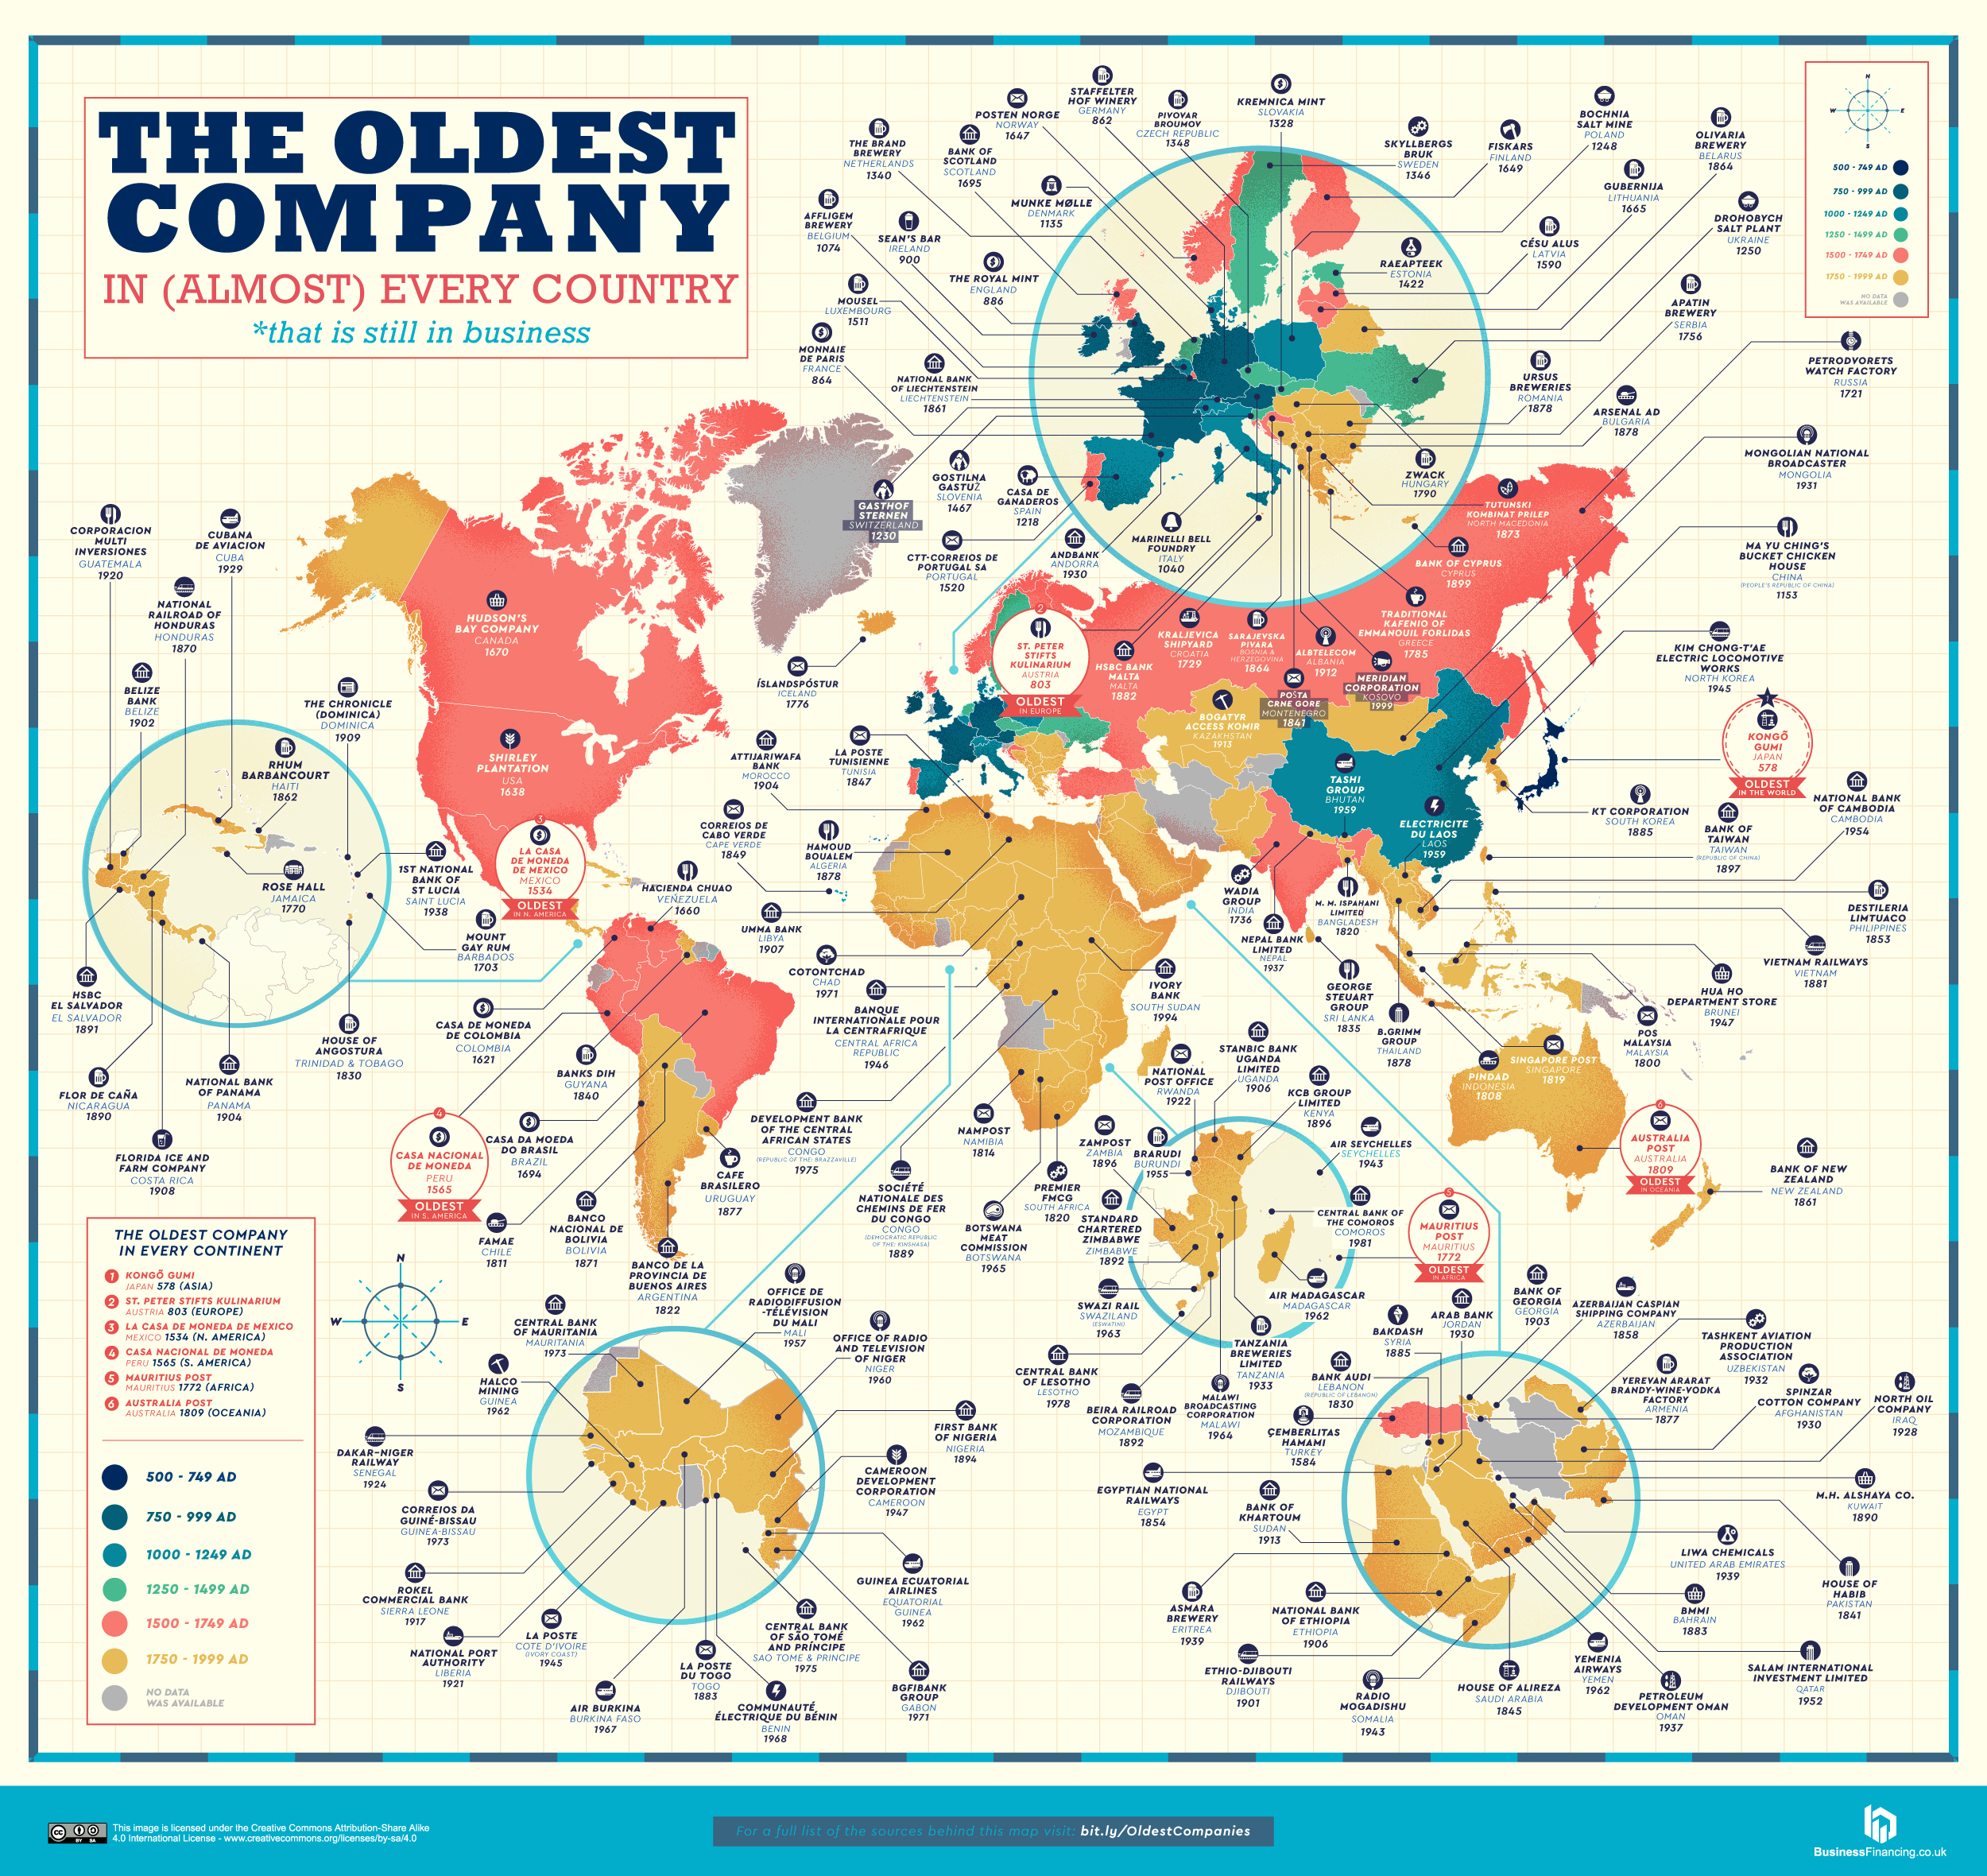 The Oldest Company in Every Country high-res